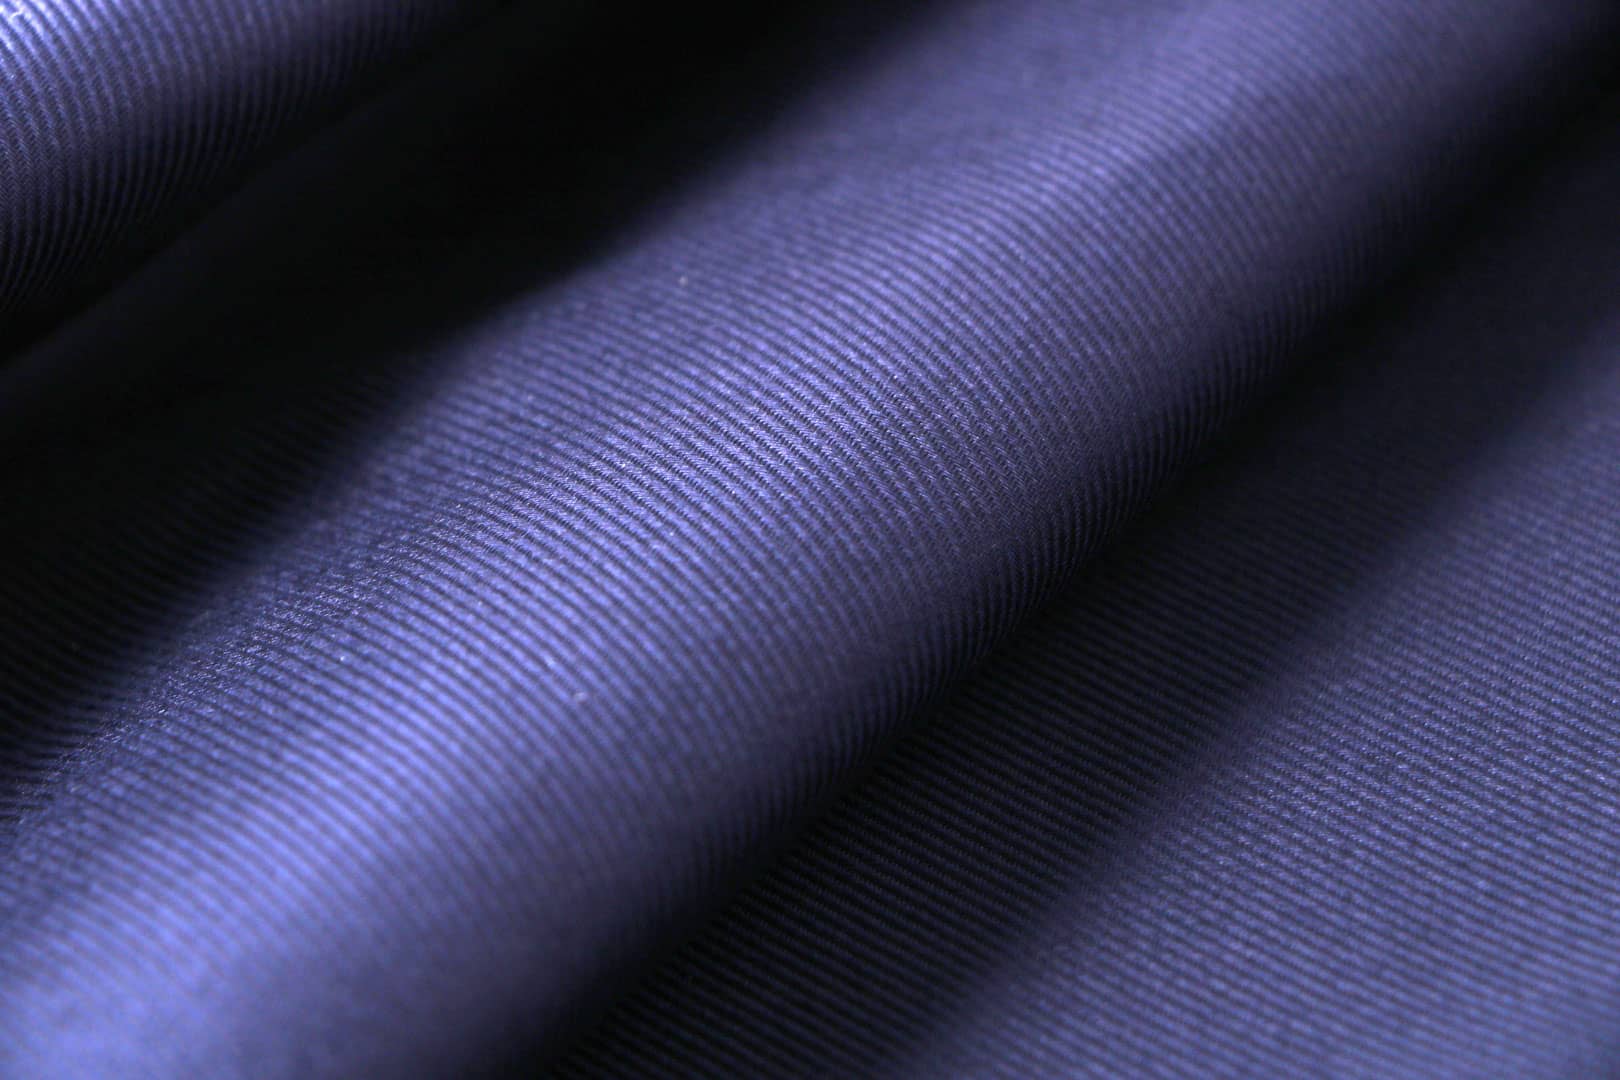 Blue Cotton fabric for dressmaking